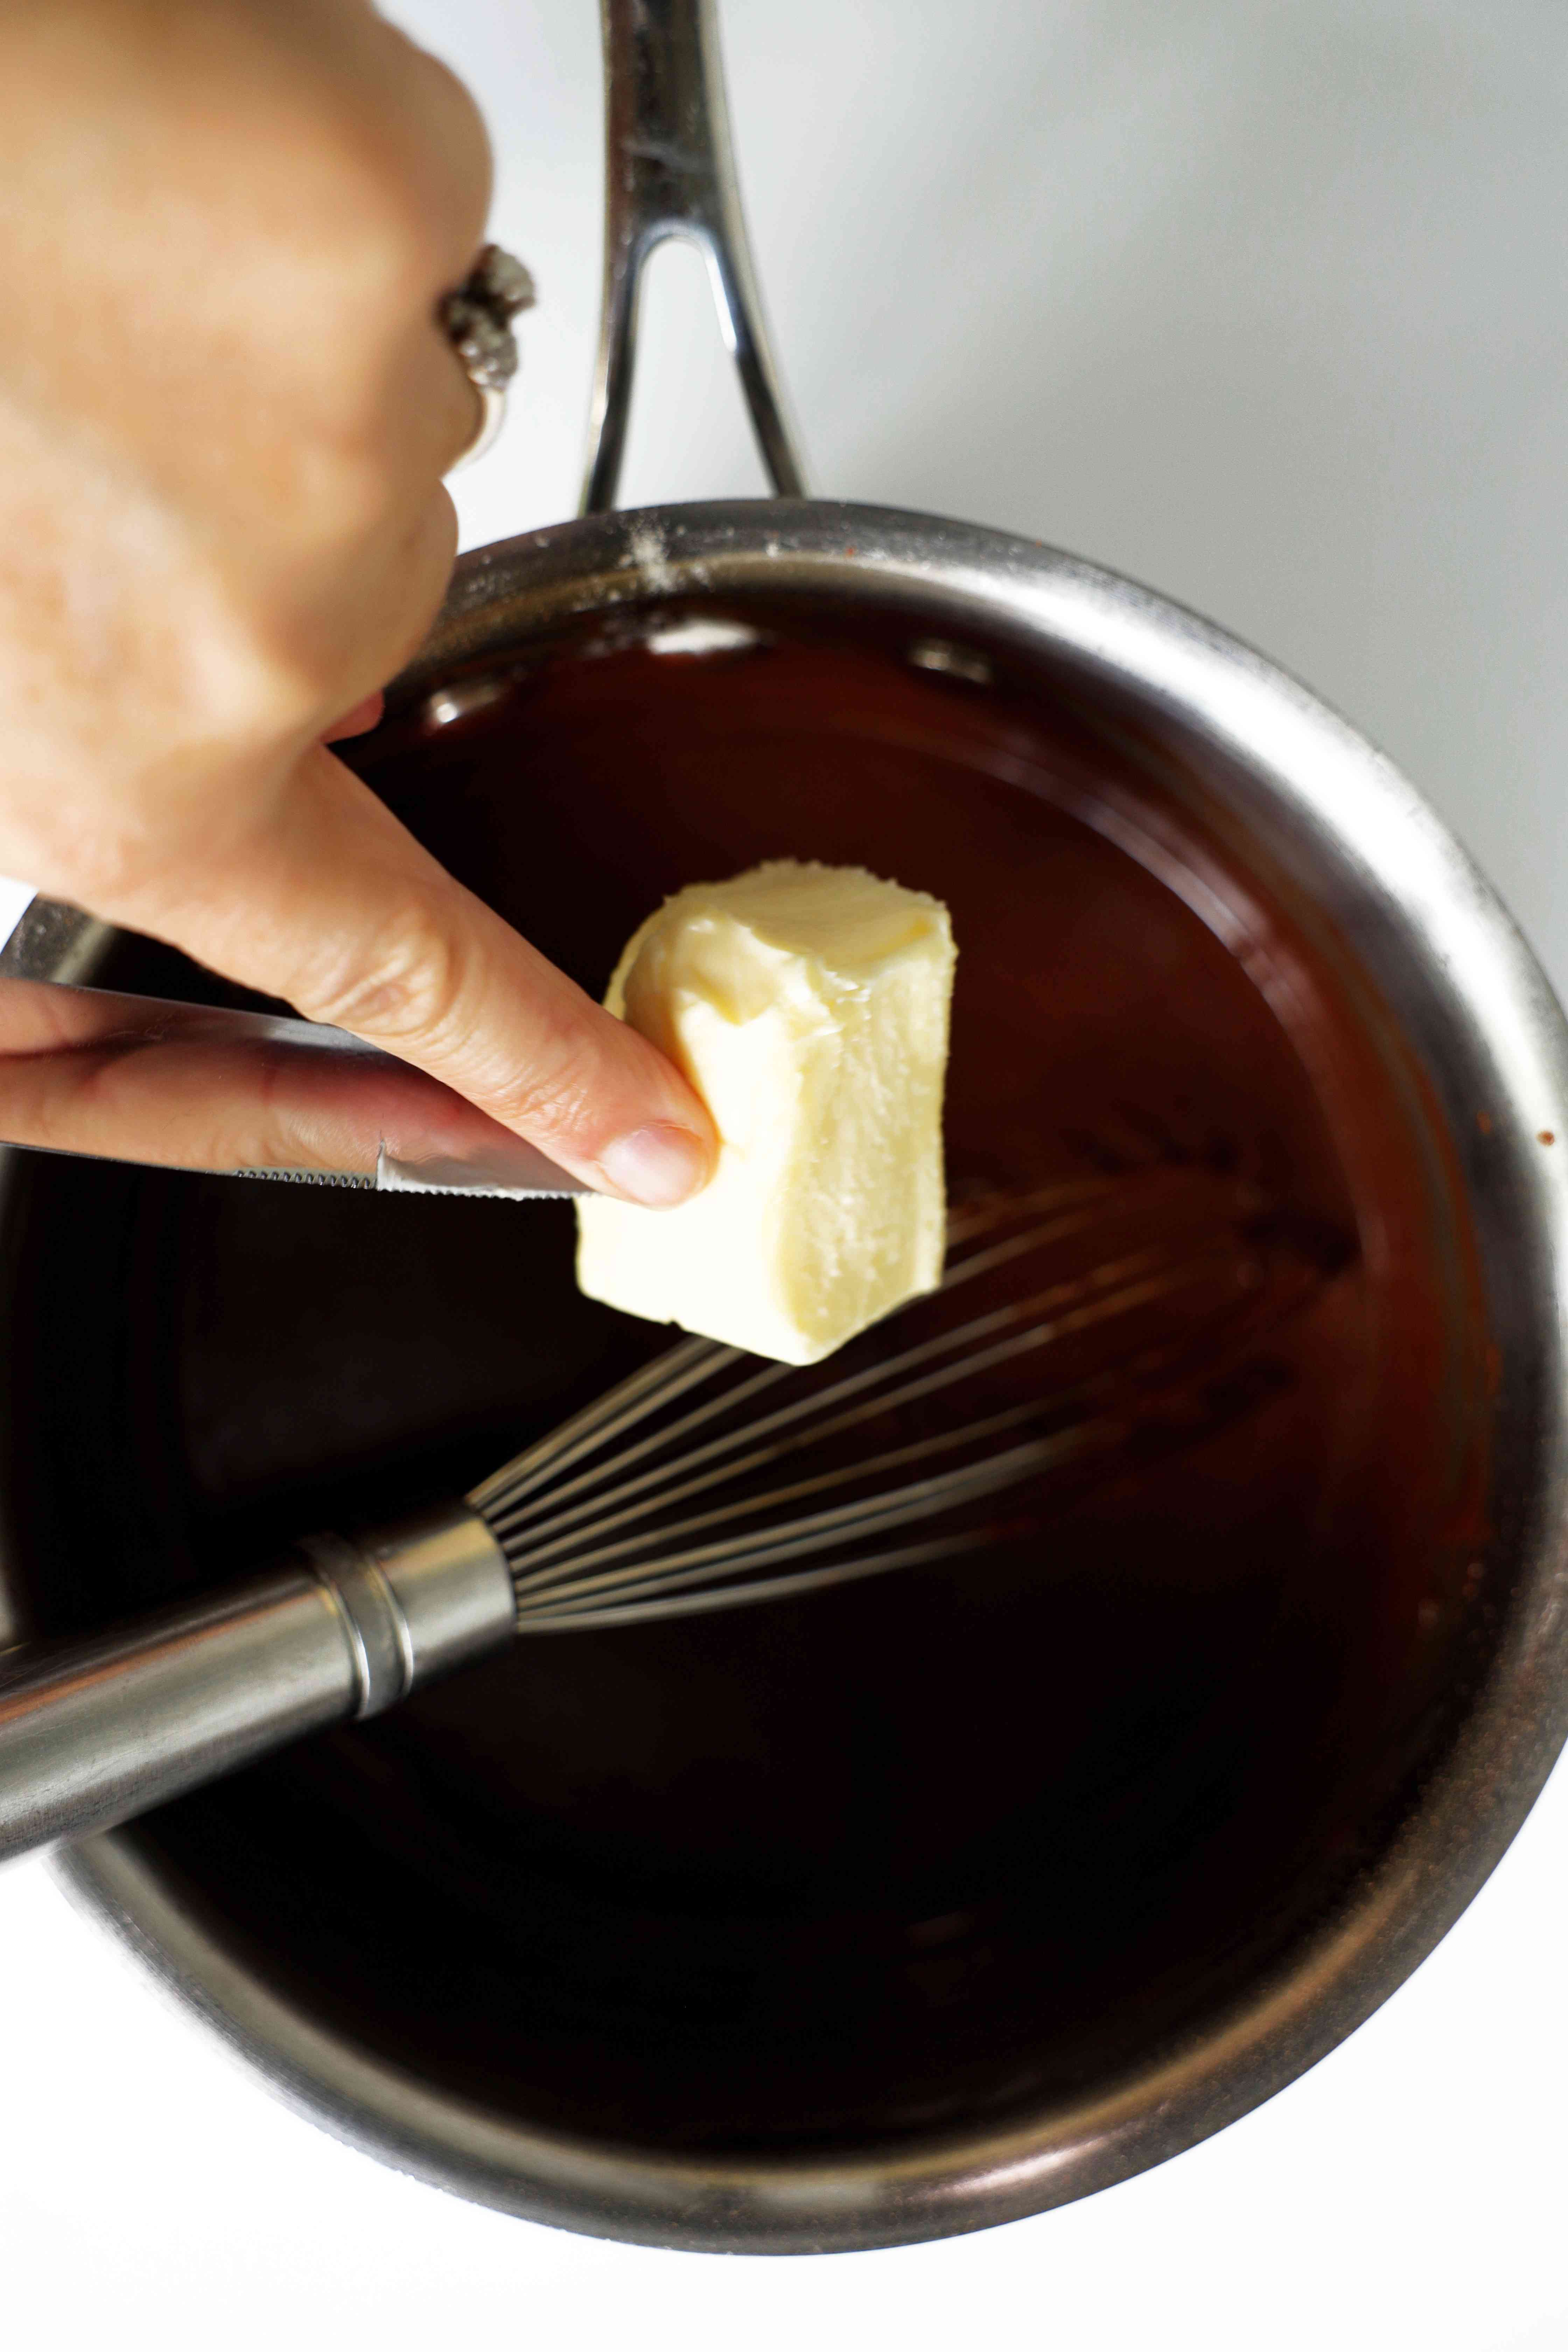 Butter being poured into the Chocolate Gravy mixture, in a saute pan with a whisk.